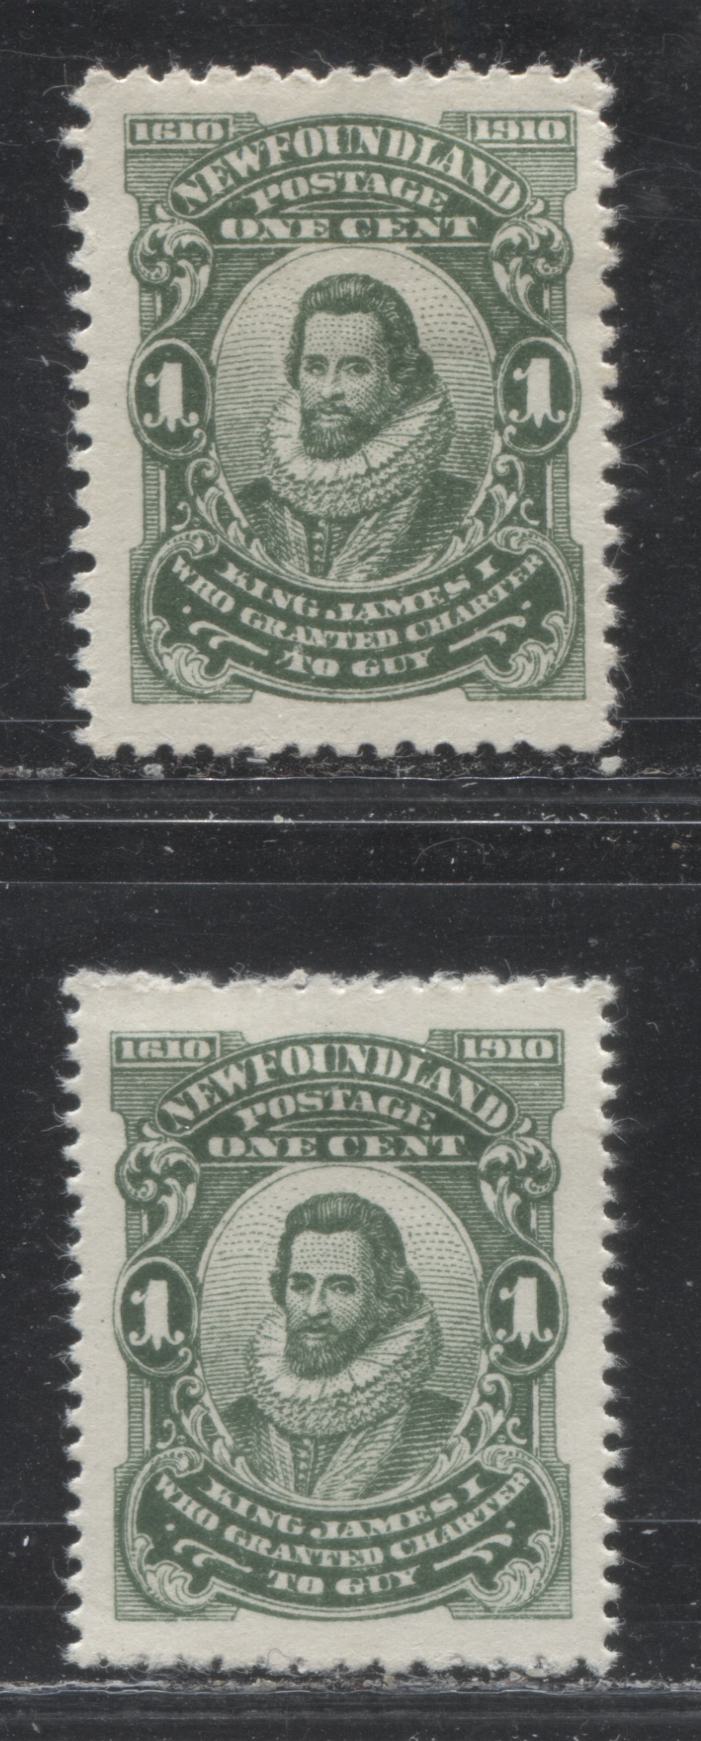 Lot 2 Newfoundland # 87a, 87b 1c Green King James I, 1910 John Guy Issue, Two VFOG Examples, Perf. 12 x 11 and 12 x 14